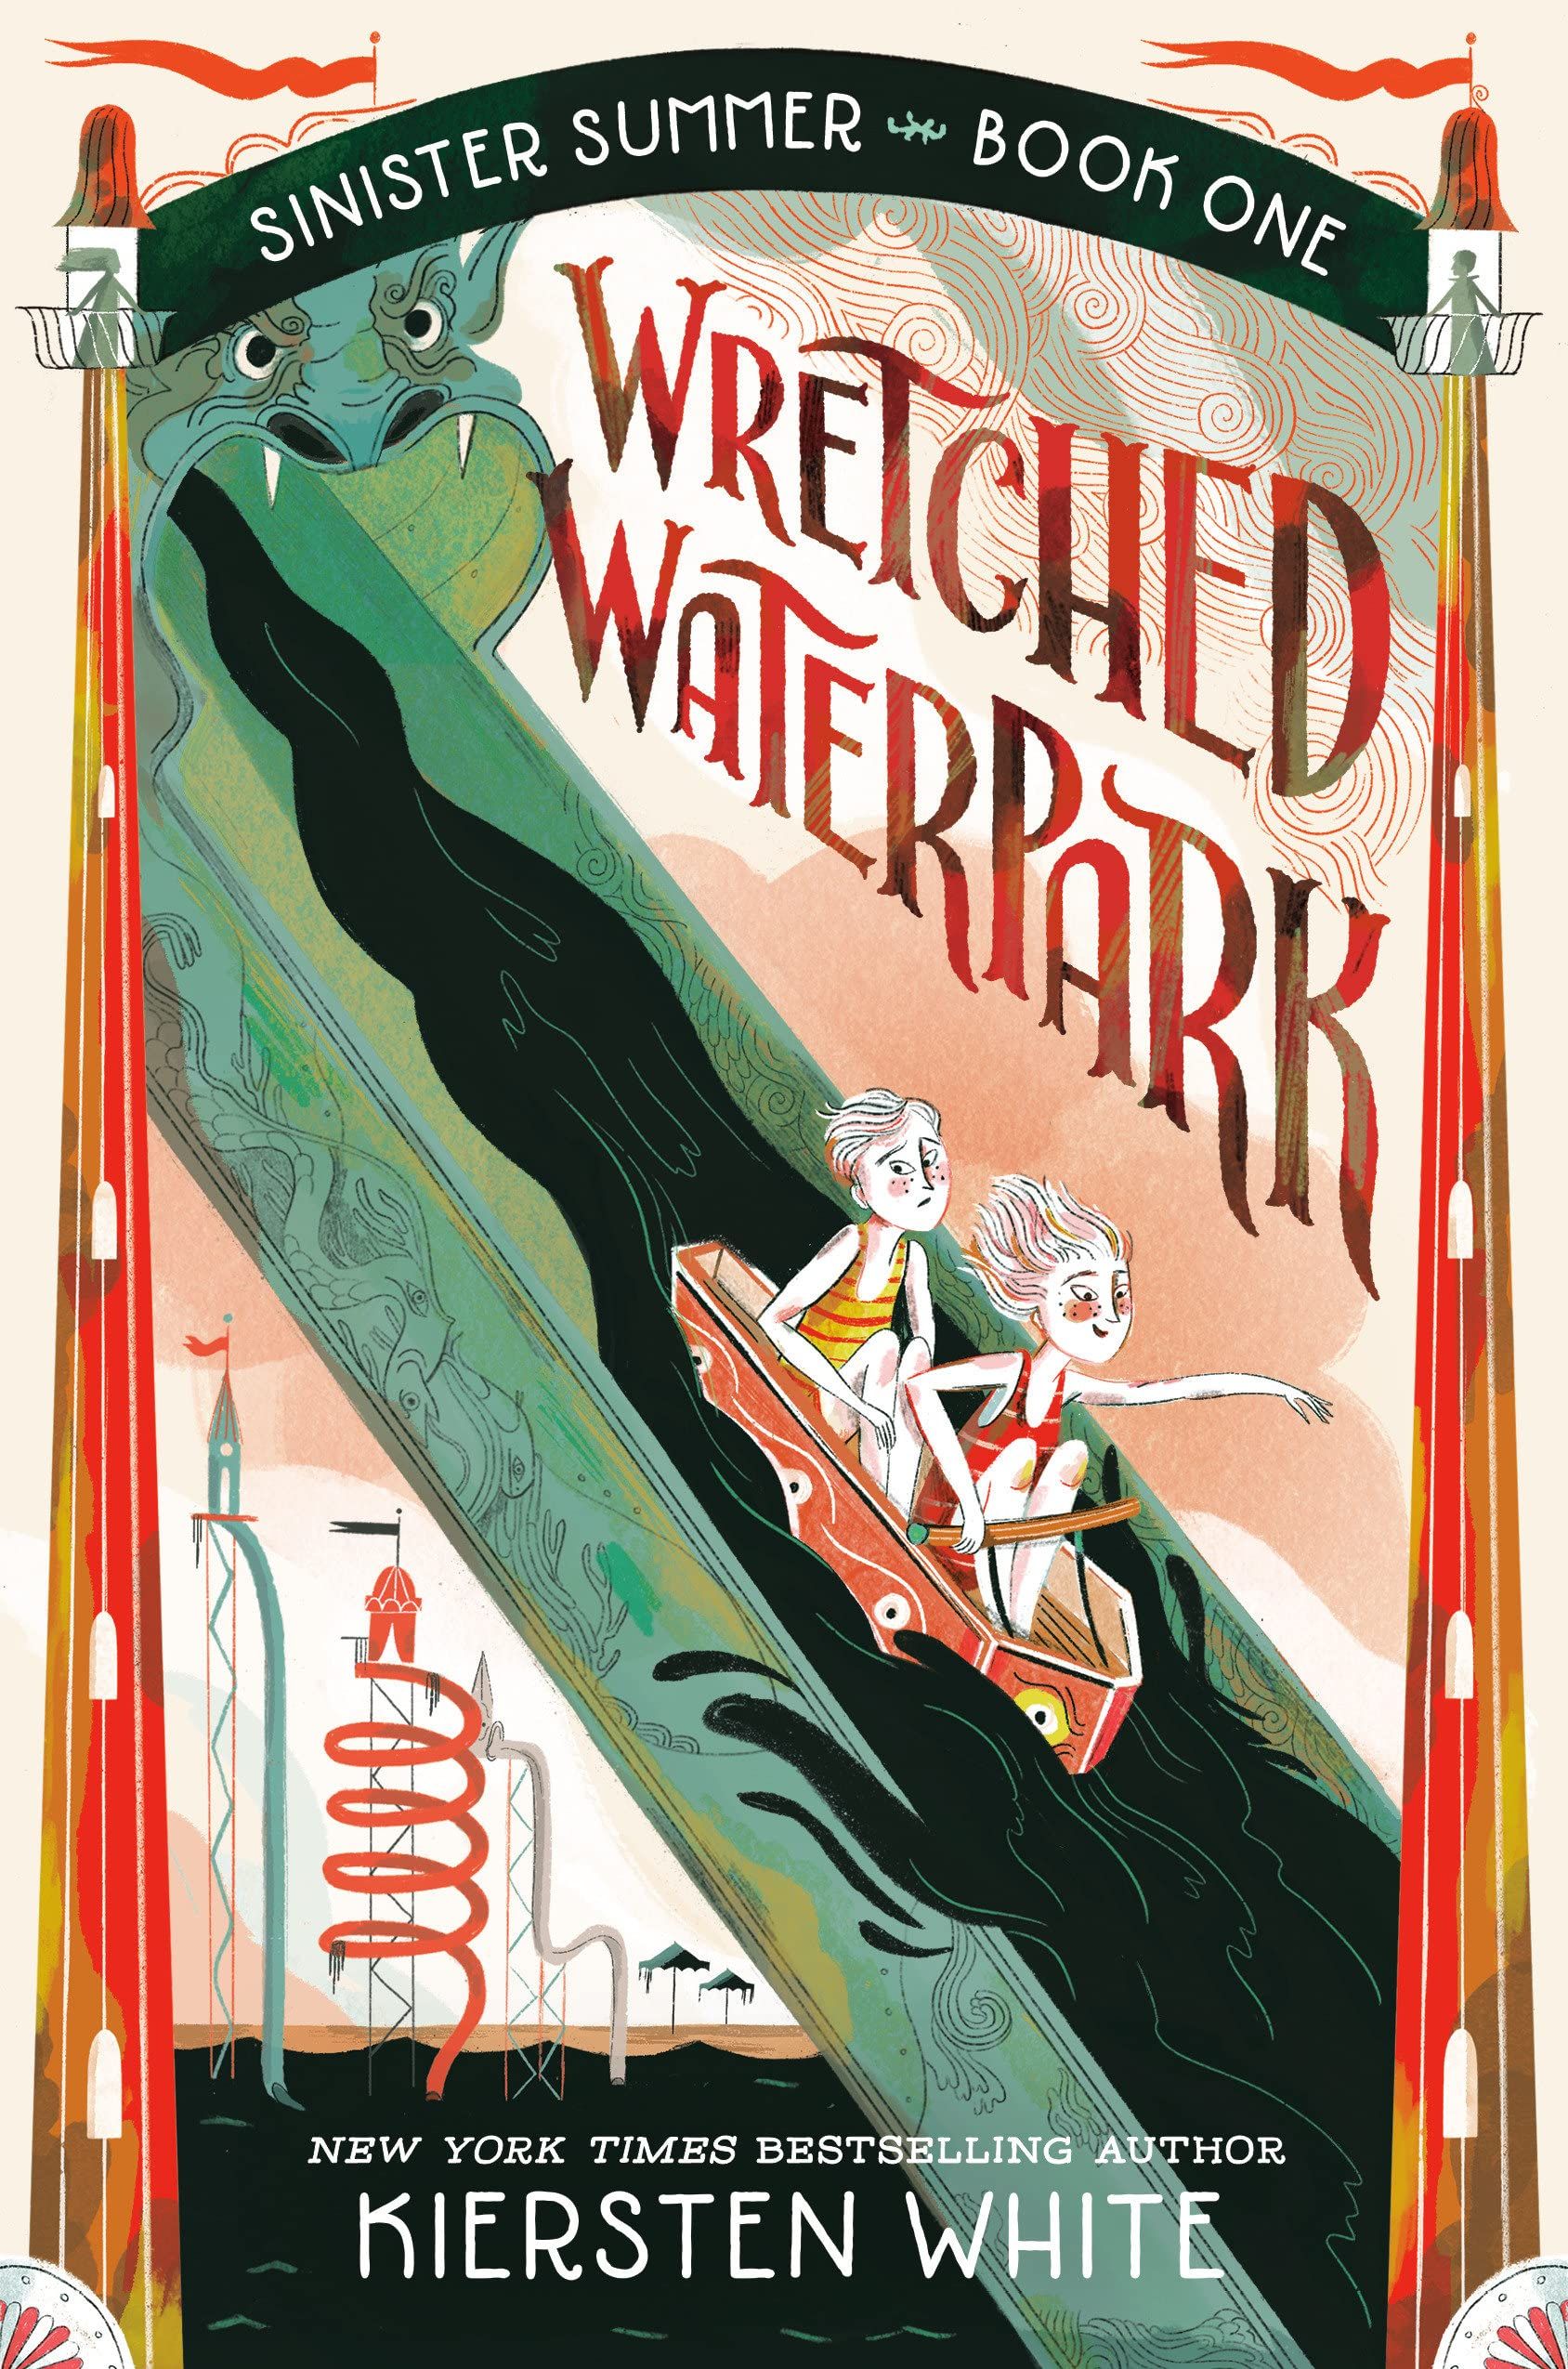 the cover of Wretched Waterpark